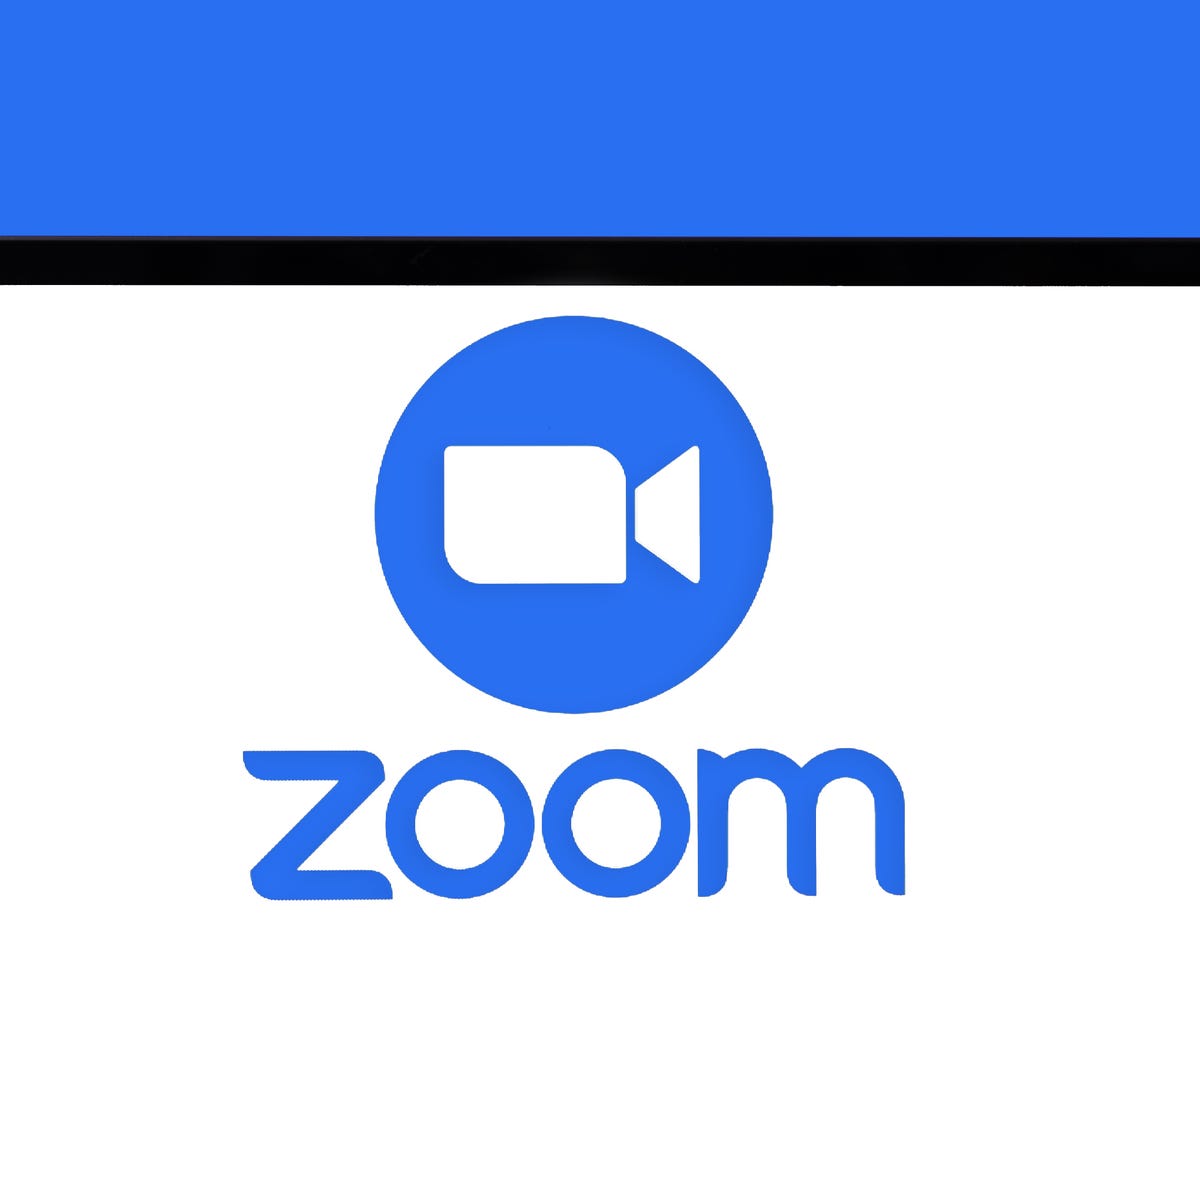 Latest Zoom Updates Aim to Increase Collaboration and Engagement